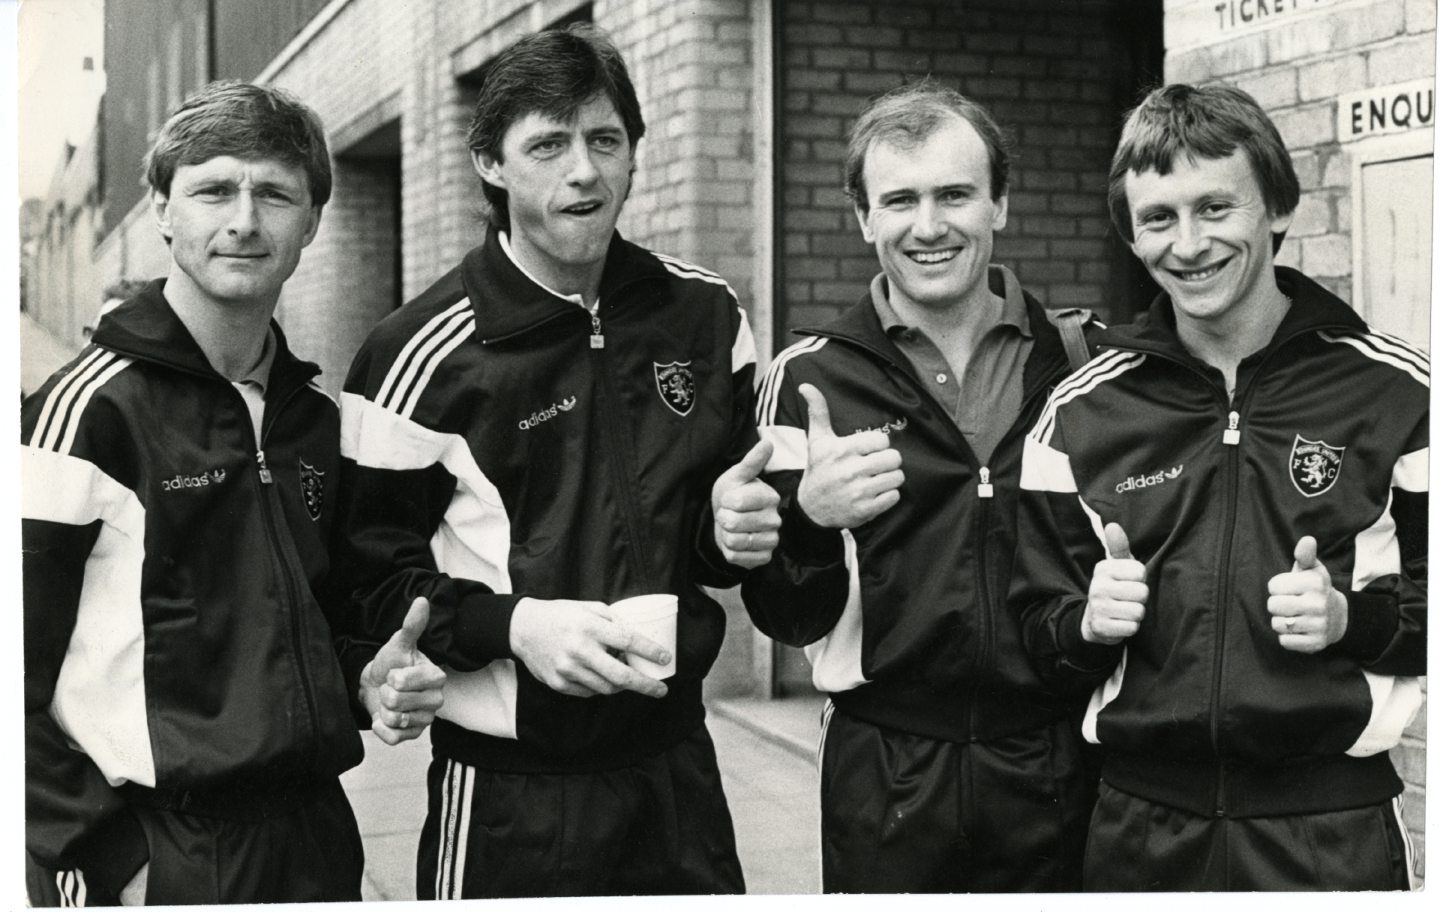 Paul Hegarty, David Narey, Eamonn Bannon and Paul Sturrock are pictured before leaving for Barcelona in 1987.